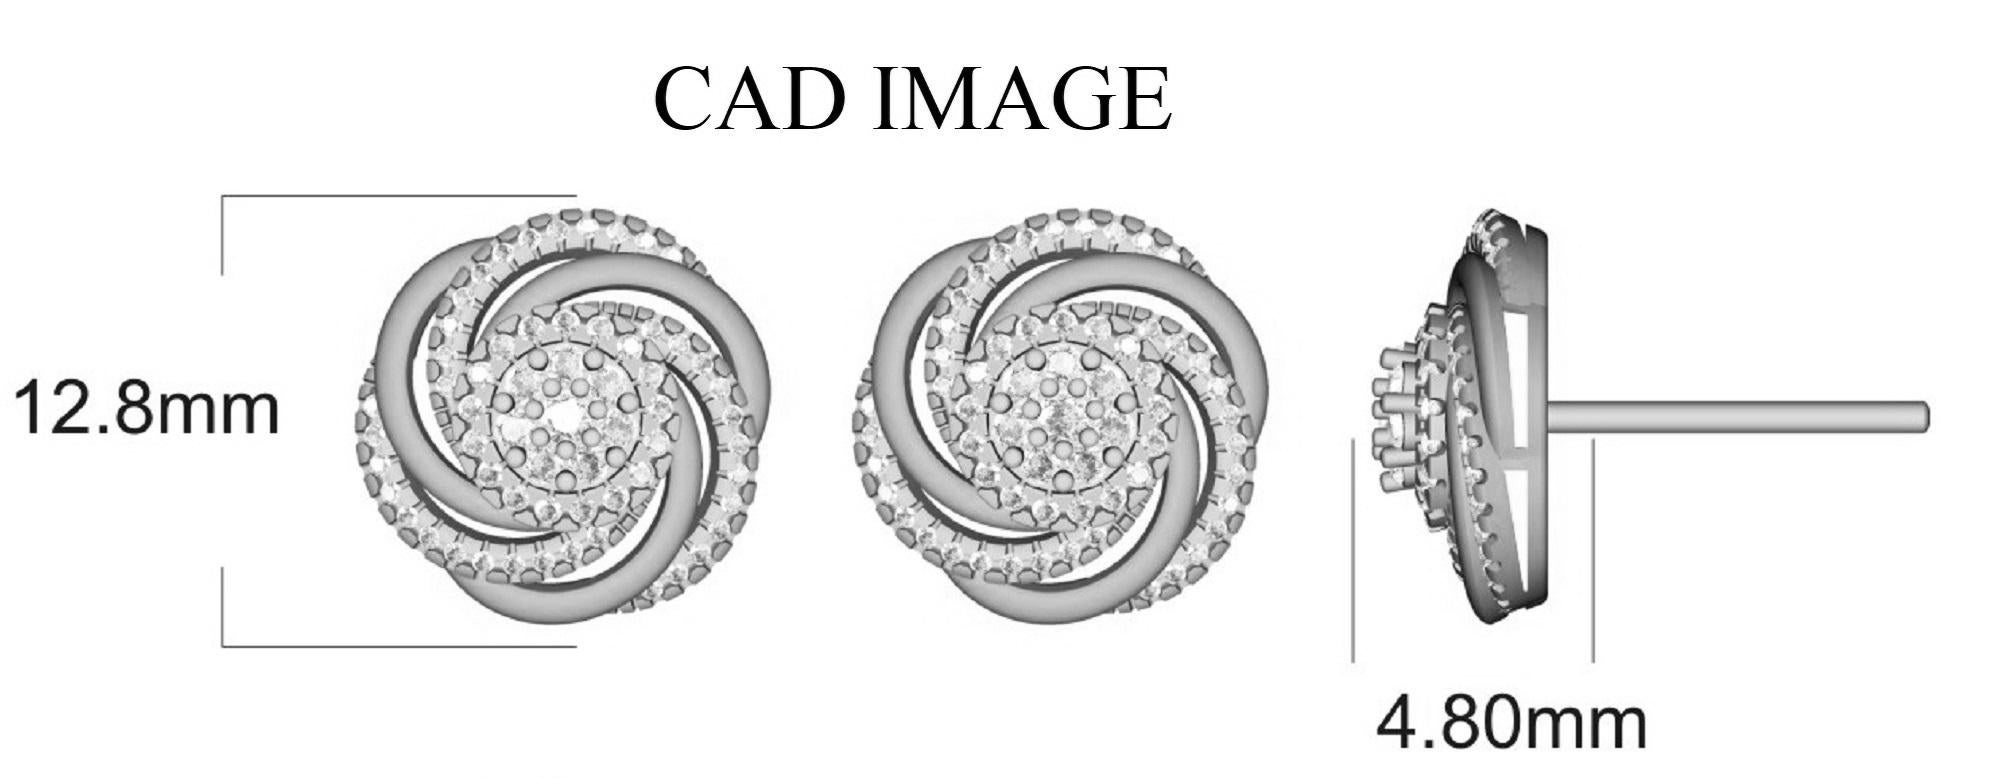 14 Karat White Gold Spiral Stud  Earrings With 122 Round Brilliant Diamonds timeless Diamond Spiral Stud earrings have 0.50 Carats of Round Brilliant set in prong and micro-prong setting, H-I color I2 clarity. These sparkling post earrings secure